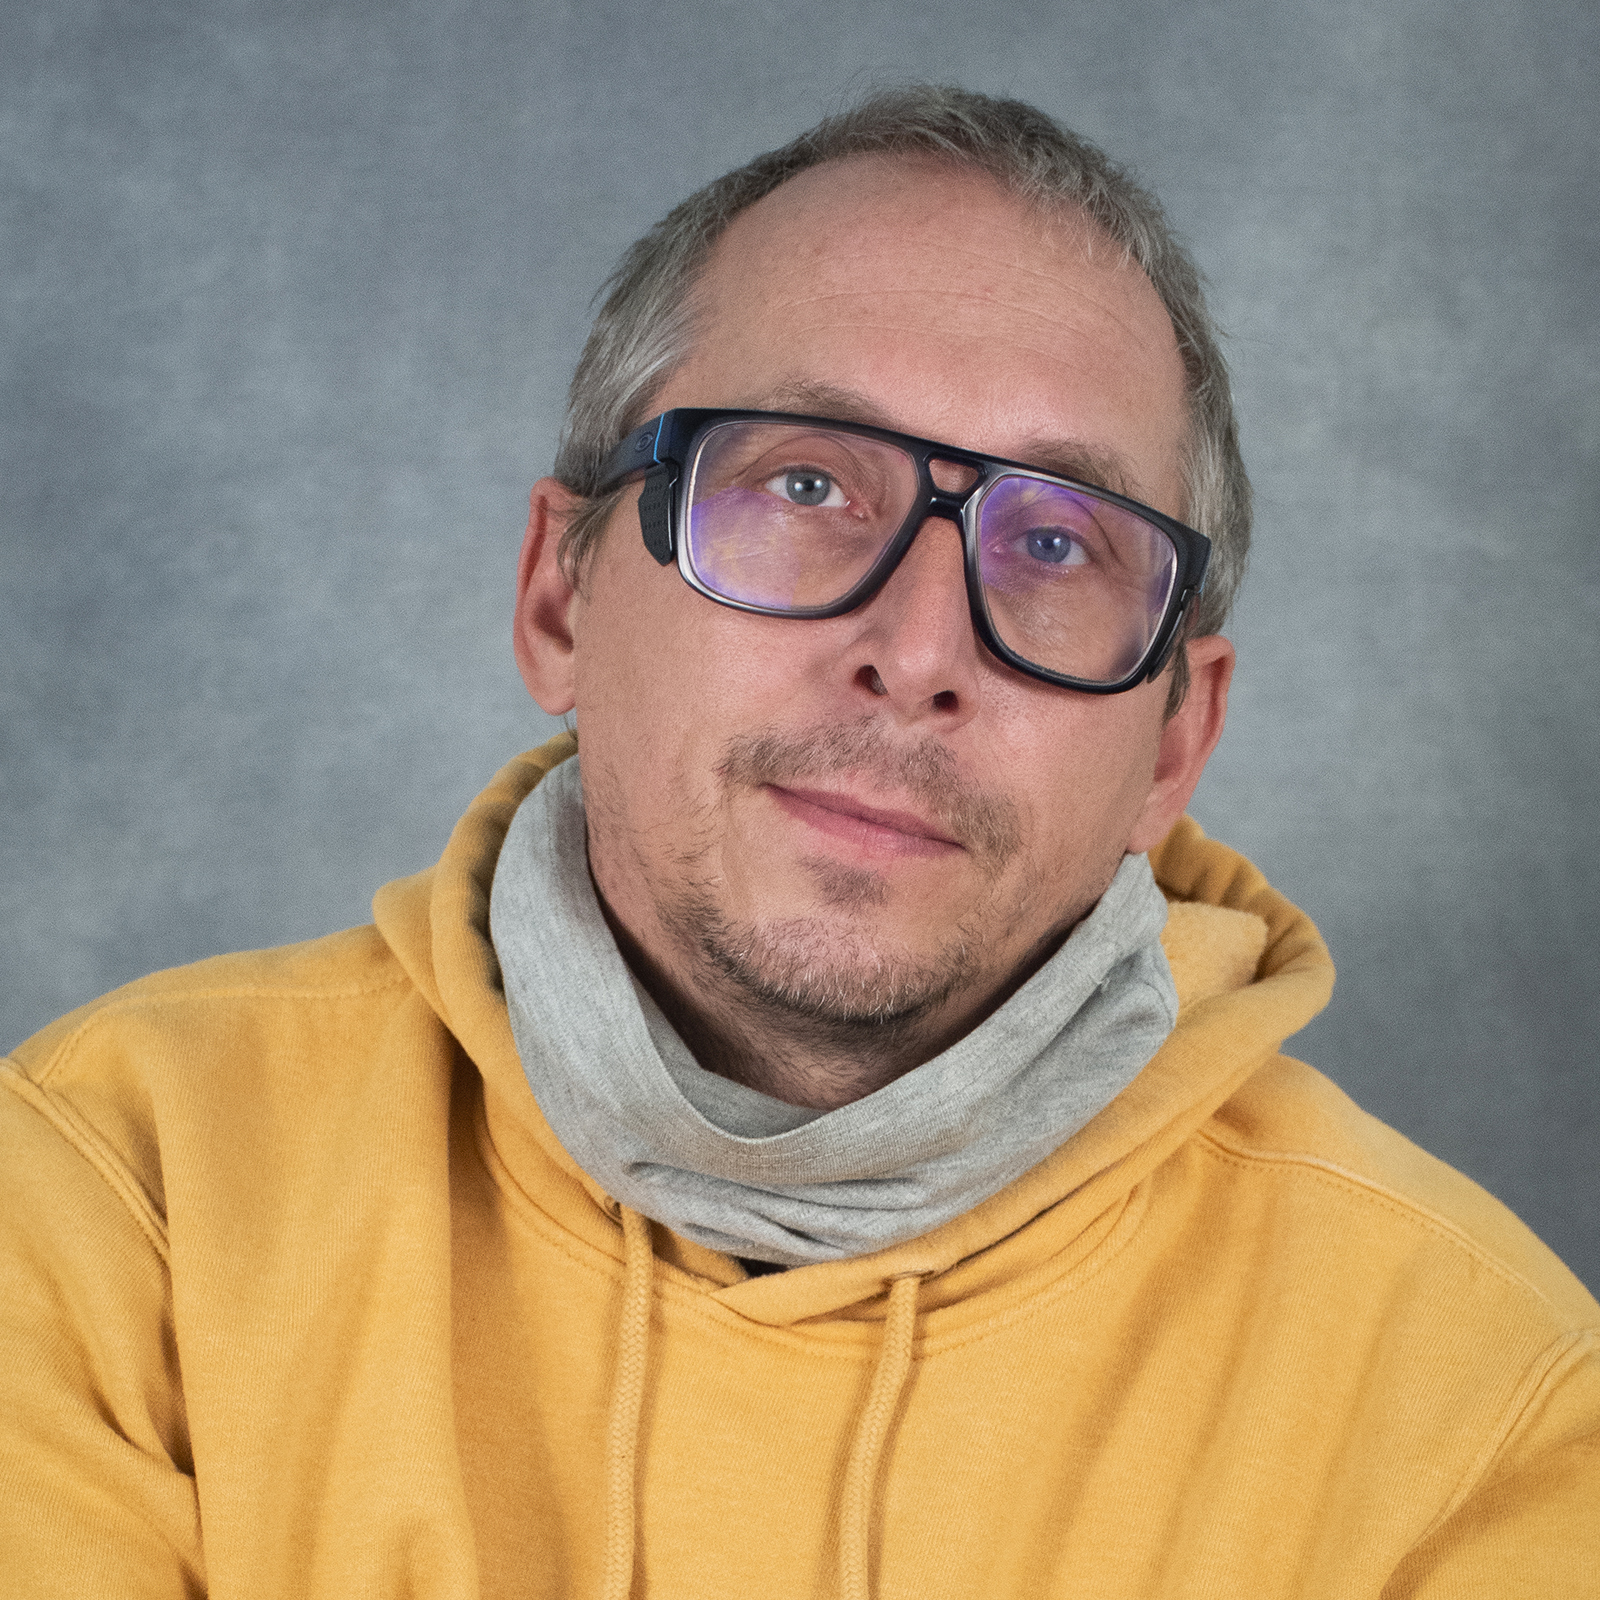 Man wearing a yellow hoodie and glasses